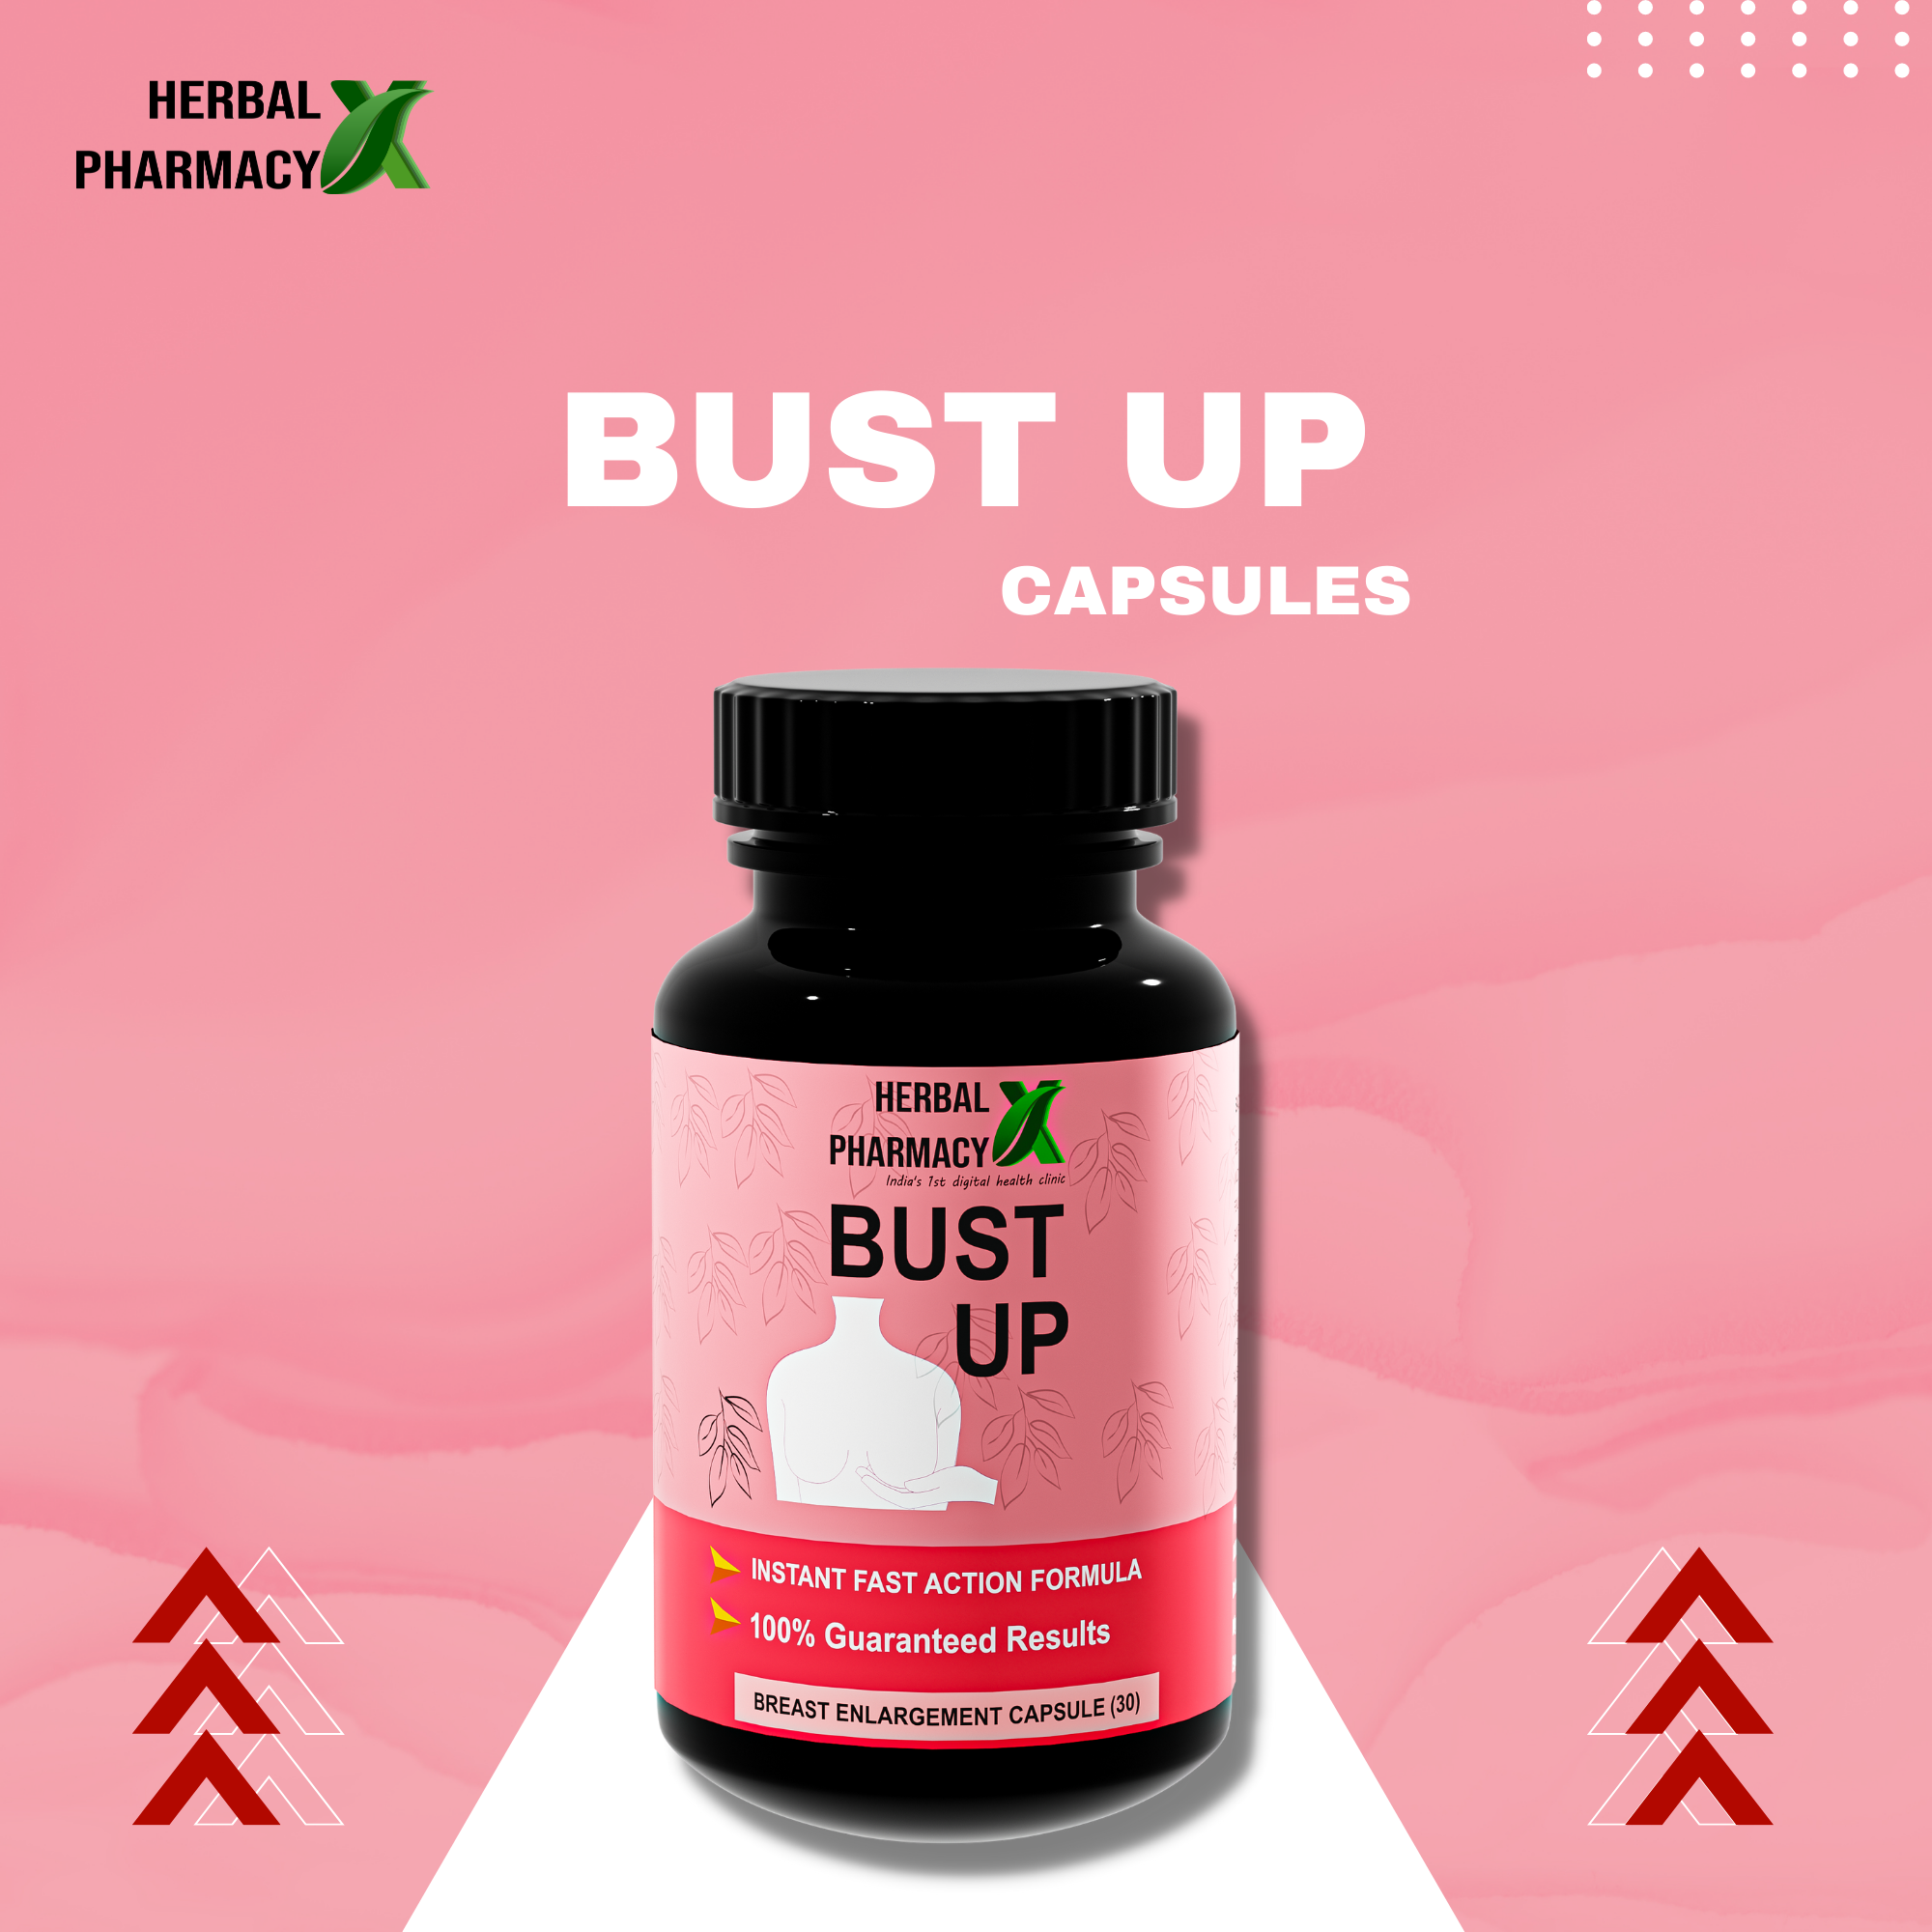 Herbal Pharmacy Bust UP Capsules with Shatavari and Fennel Seeds